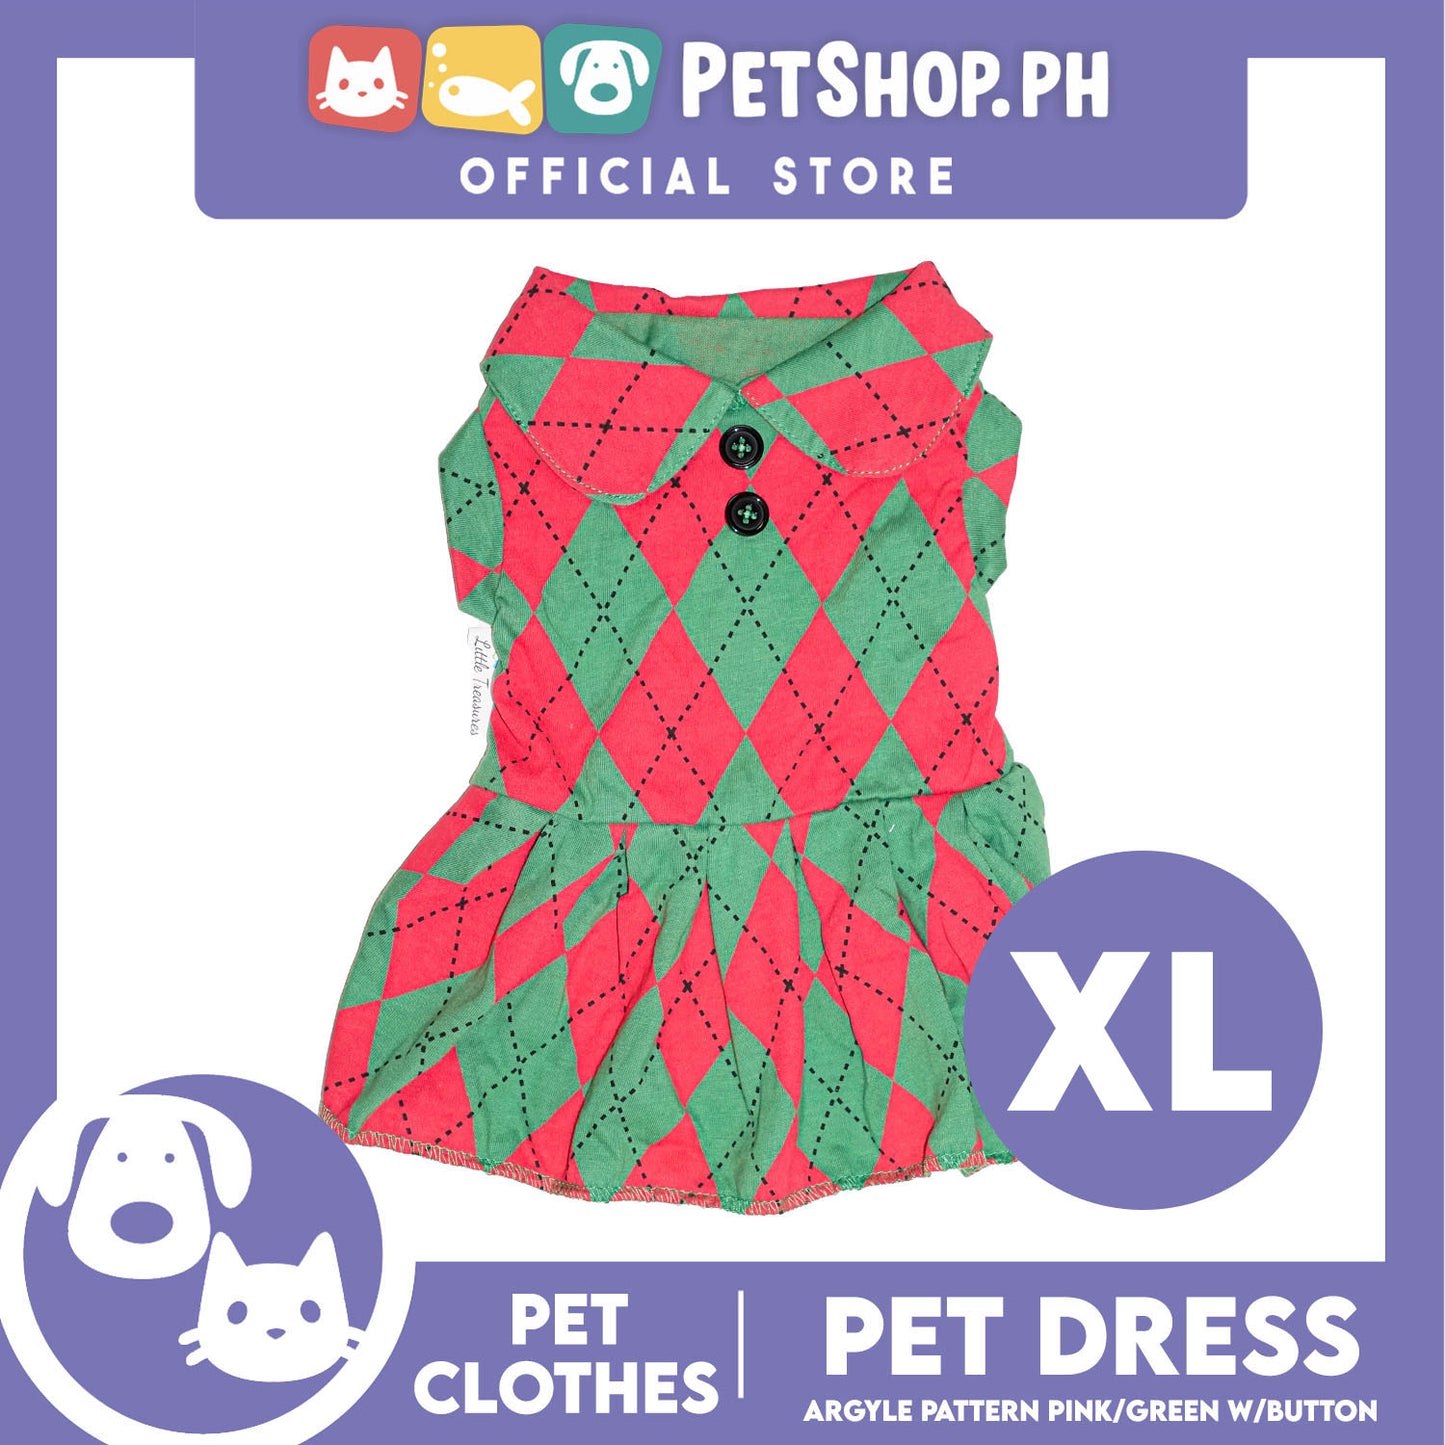 Pet Dress Argyle Pink/Green with Button Dress (Extra Large) Perfect Fit for Dogs and Cats